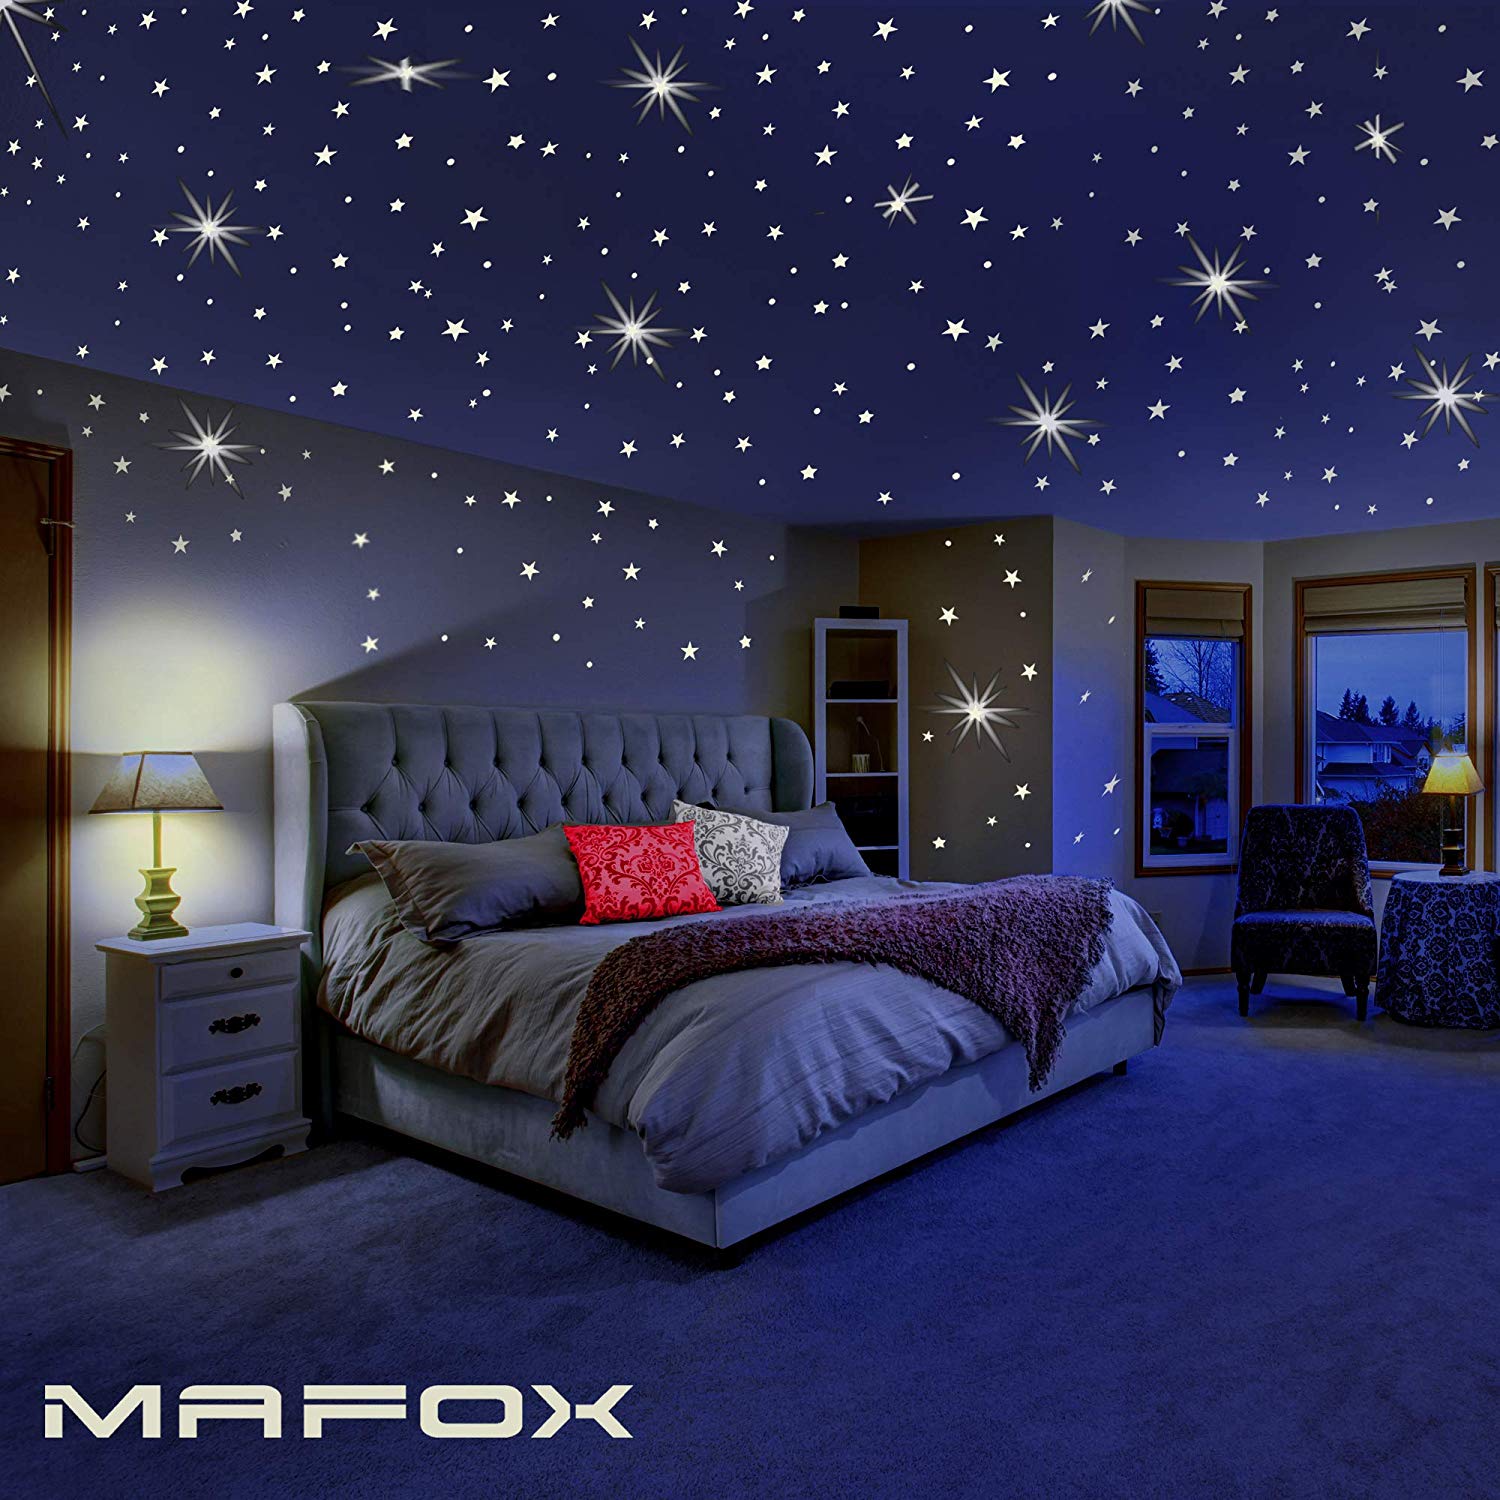 Glow In The Dark Stars For Ceiling Or Wall Stickers - Bedroom Room Decoration Items - HD Wallpaper 